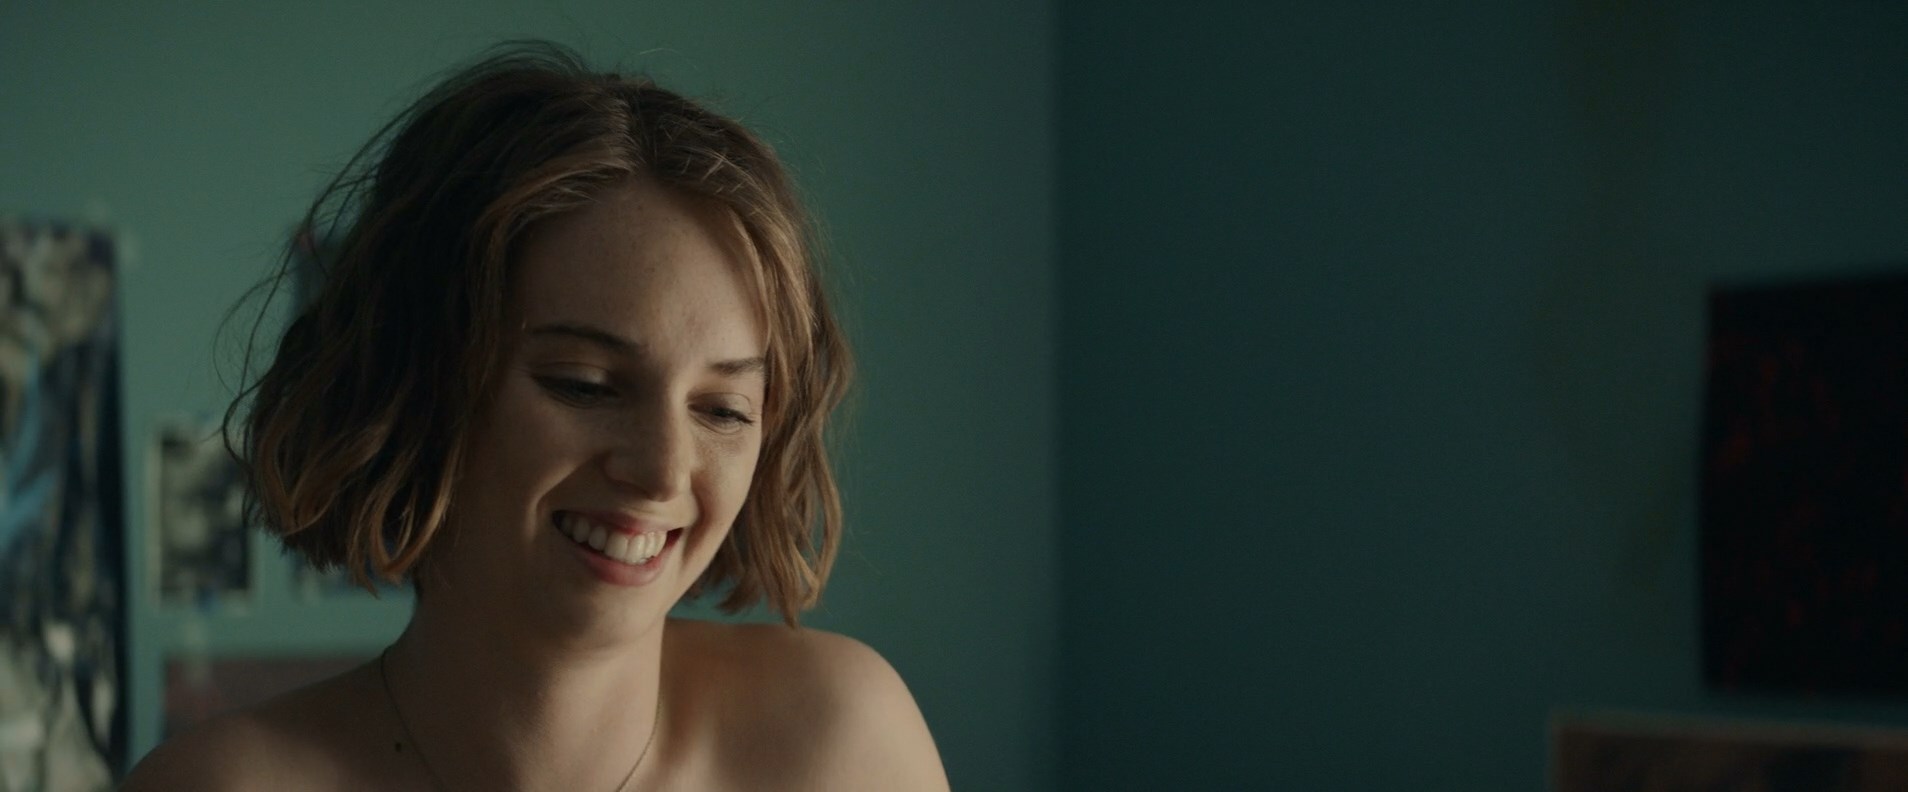 Maya Hawke makes out with some guy, her right boob is out from the shirt. 